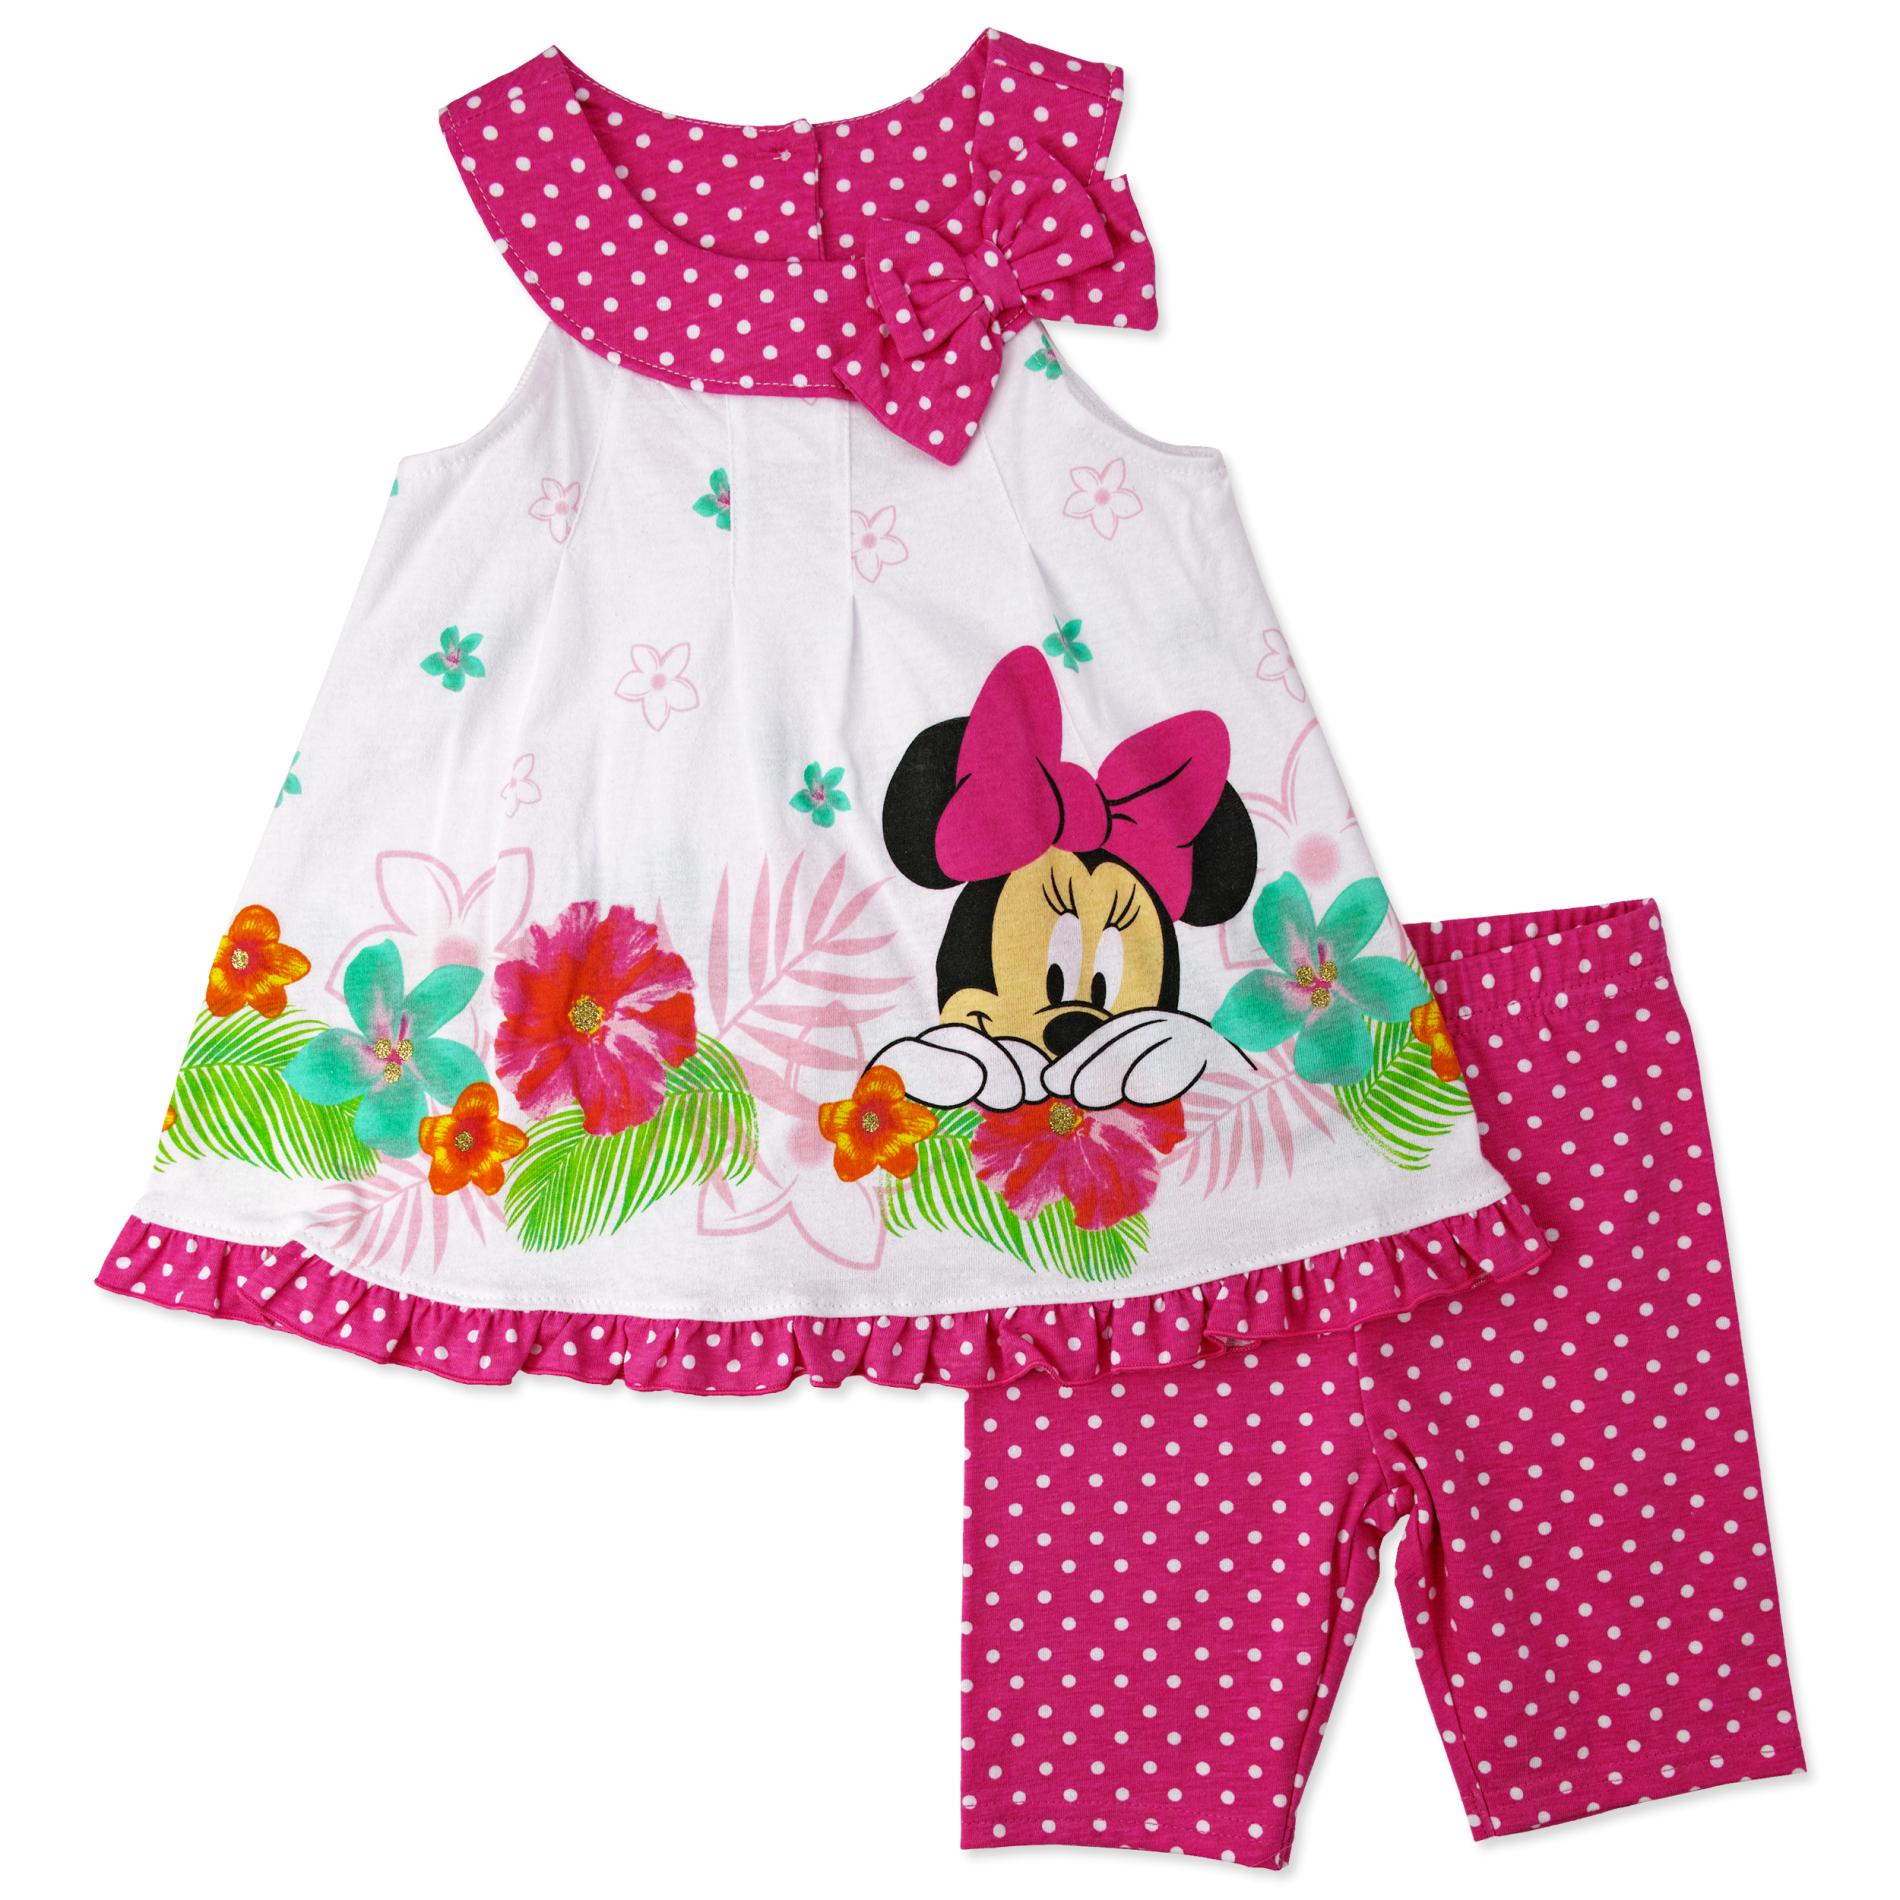 Disney Minnie Mouse Infant & Toddler Girls' Sleeveless Top